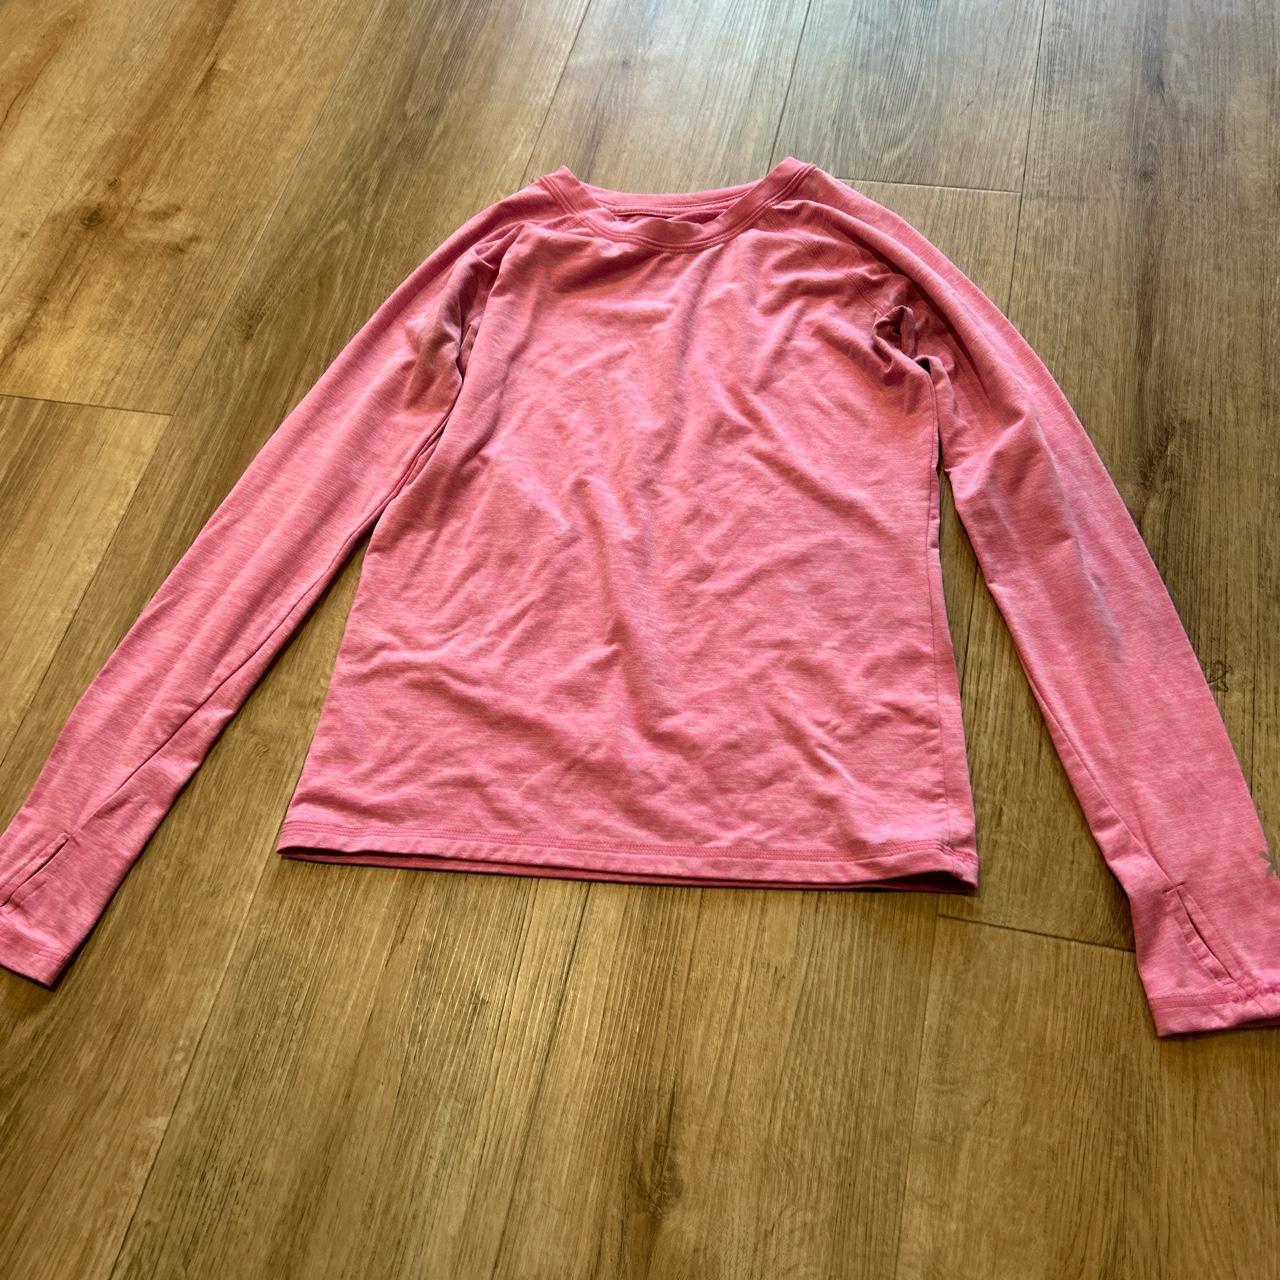 pink all in motion long sleeve workout top youth 10/12 - Depop